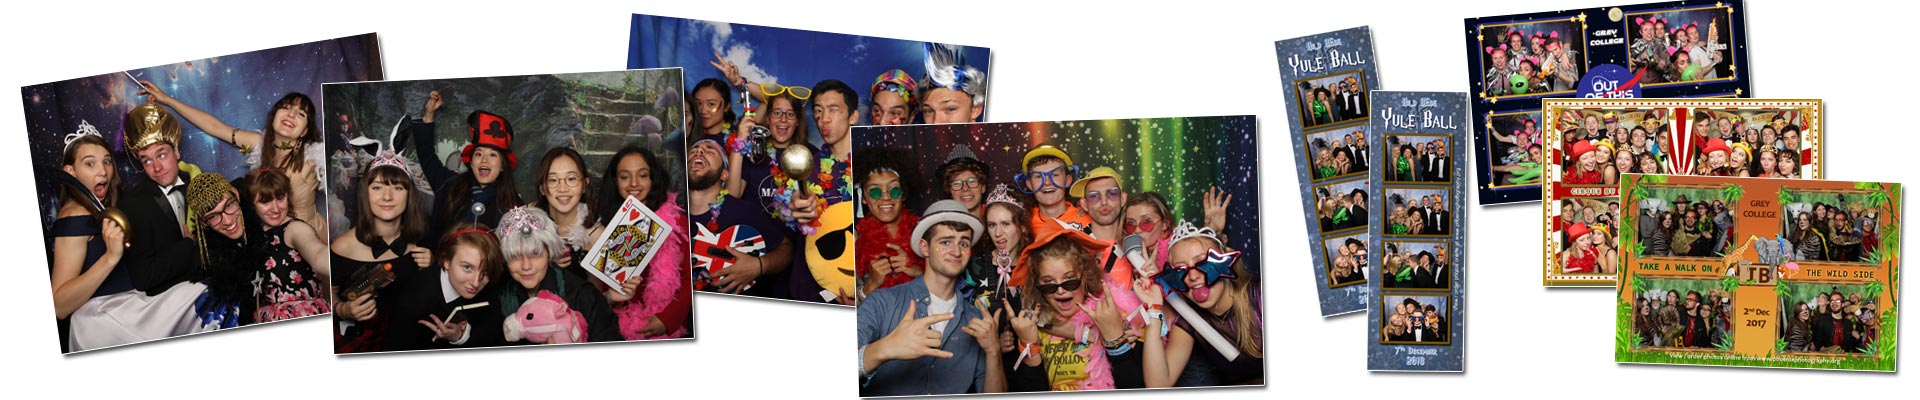 Standard Photobooth example photos and printouts